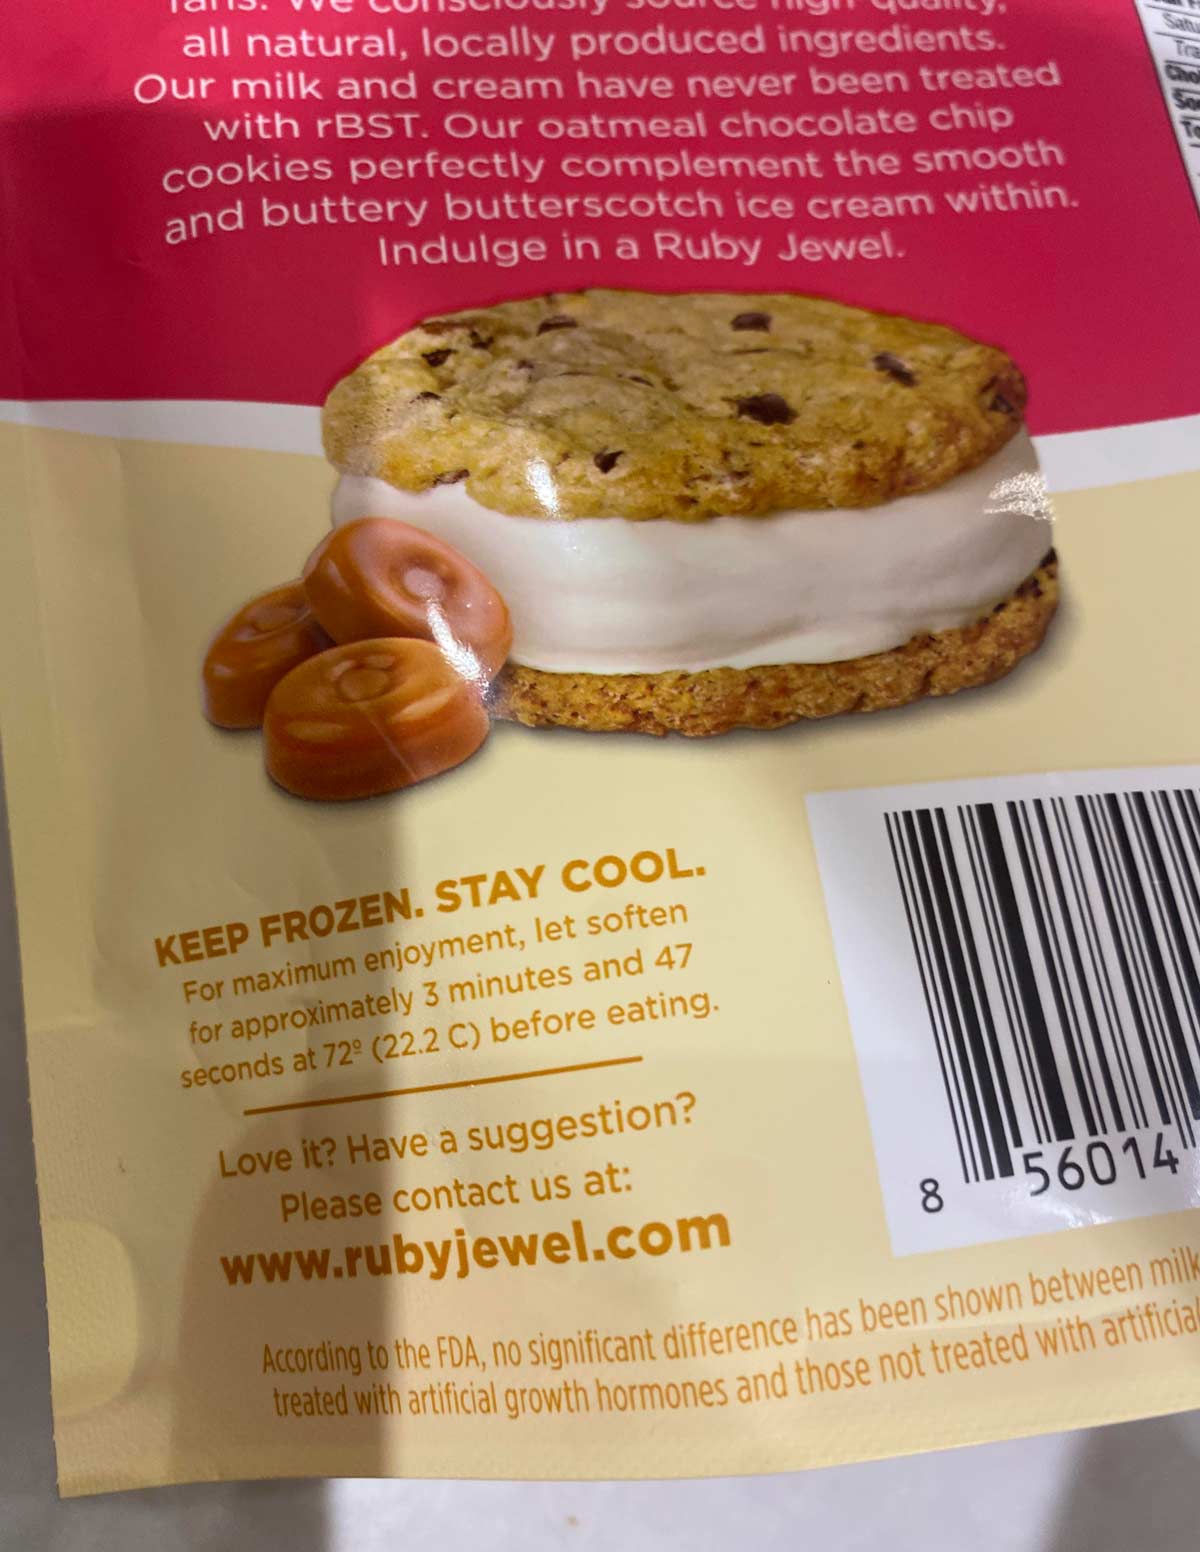 My ice cream sandwich has oddly specific thawing instructions